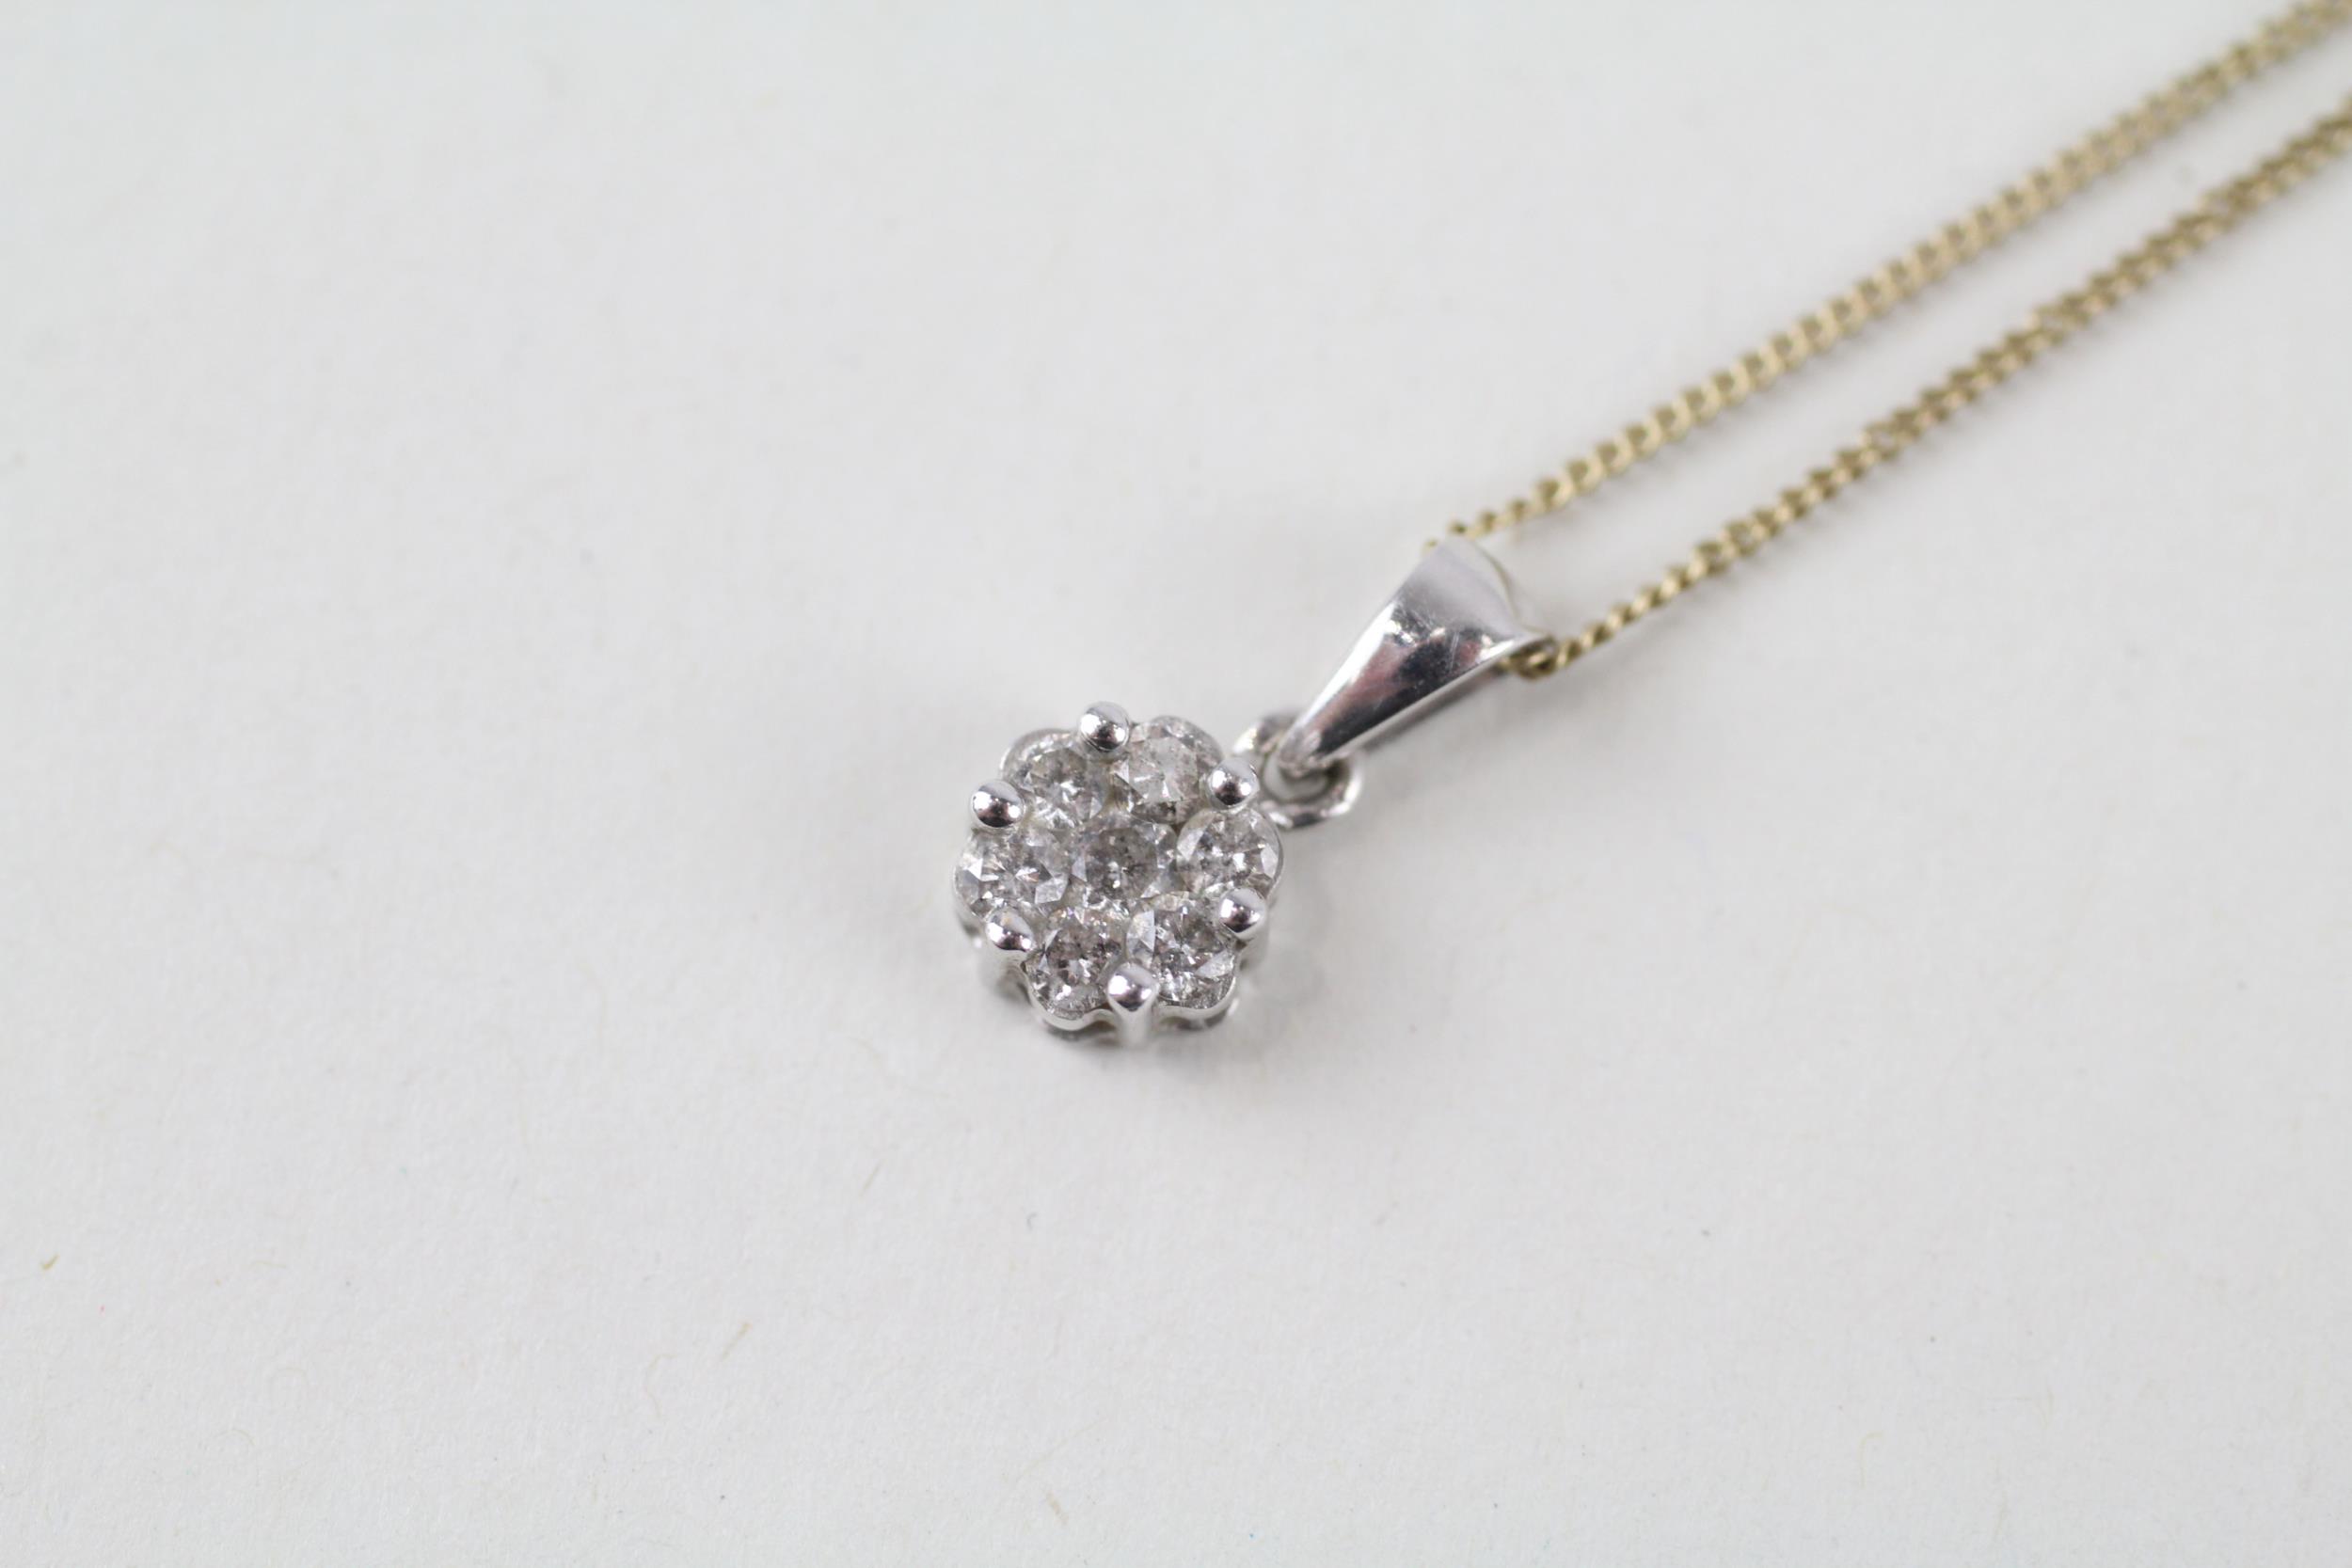 9ct gold diamond cluster pendant & chain (1.5g) - Image 2 of 4